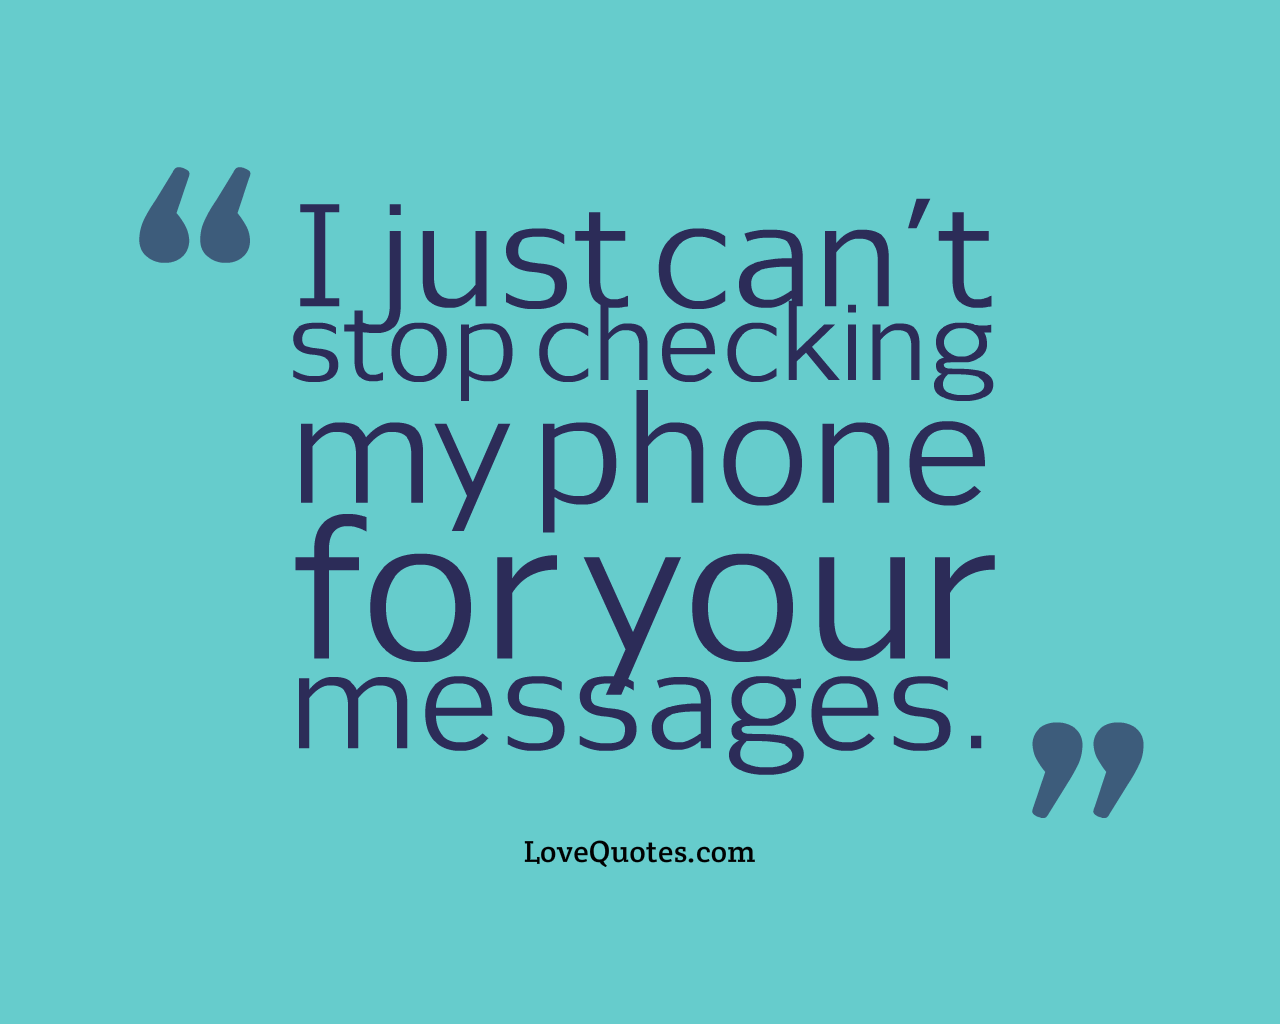 Your Messages Love Quotes